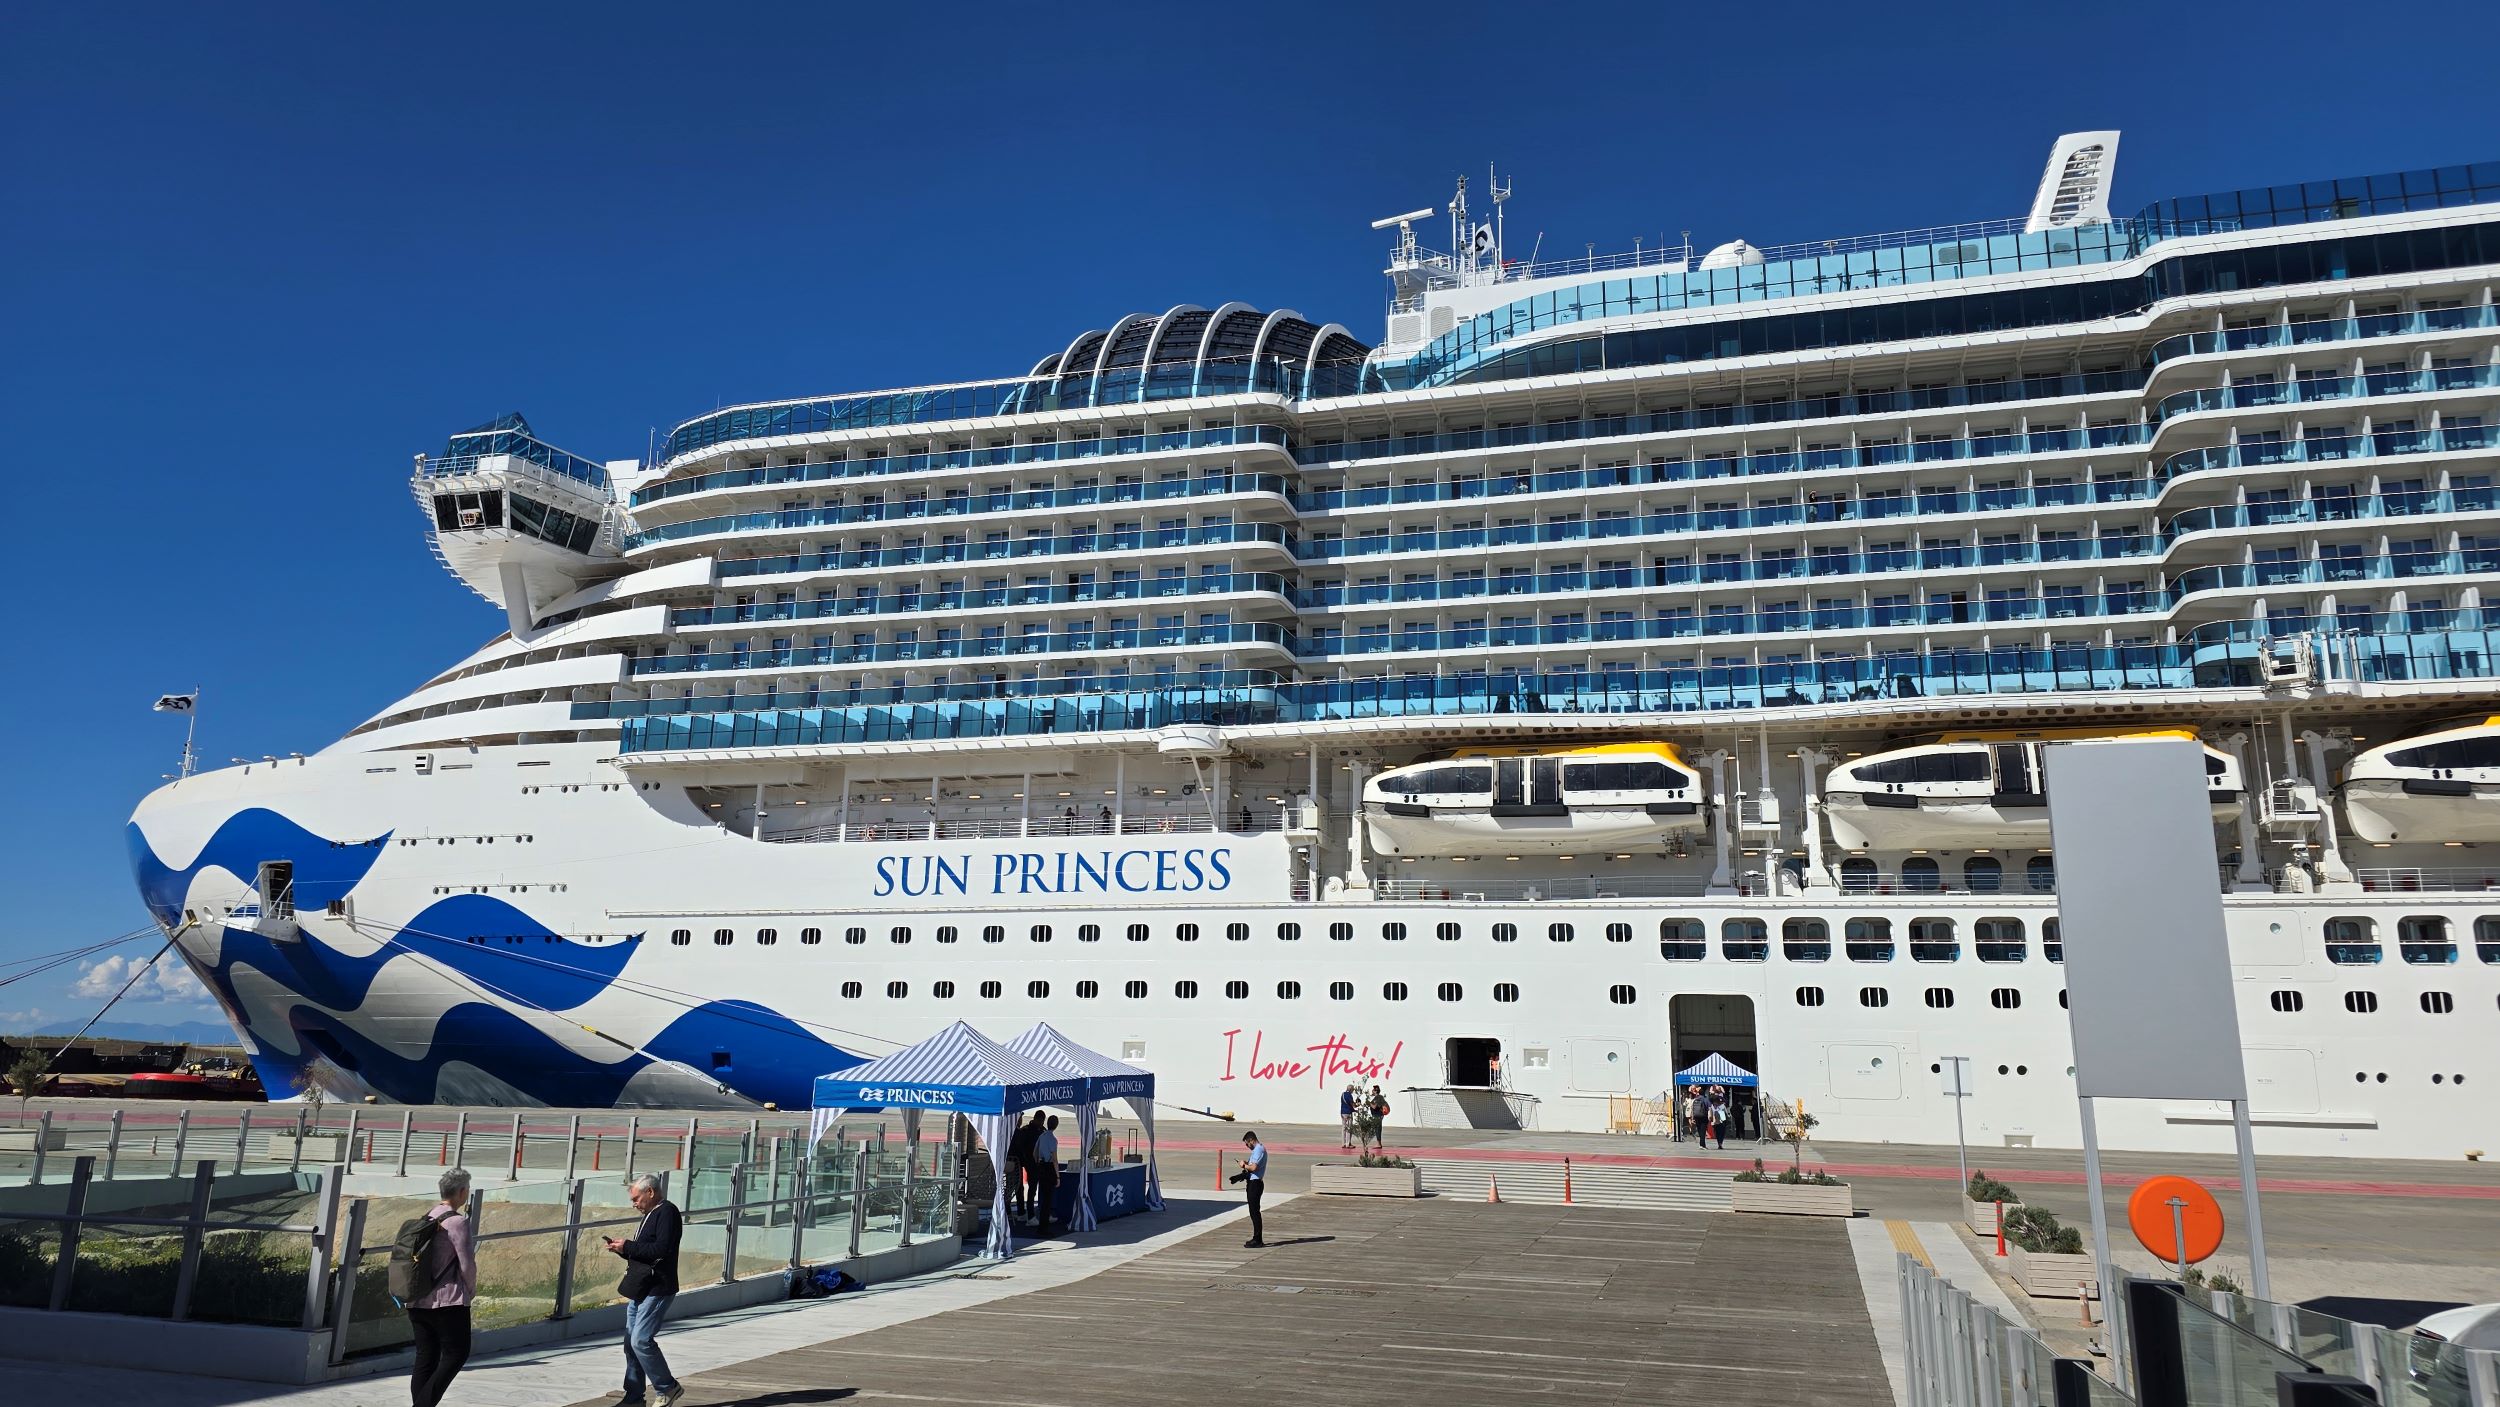 The new Sun Princess Princess Cruises latest Love Boat is shown at the Port of Piraeus near Athens Greece